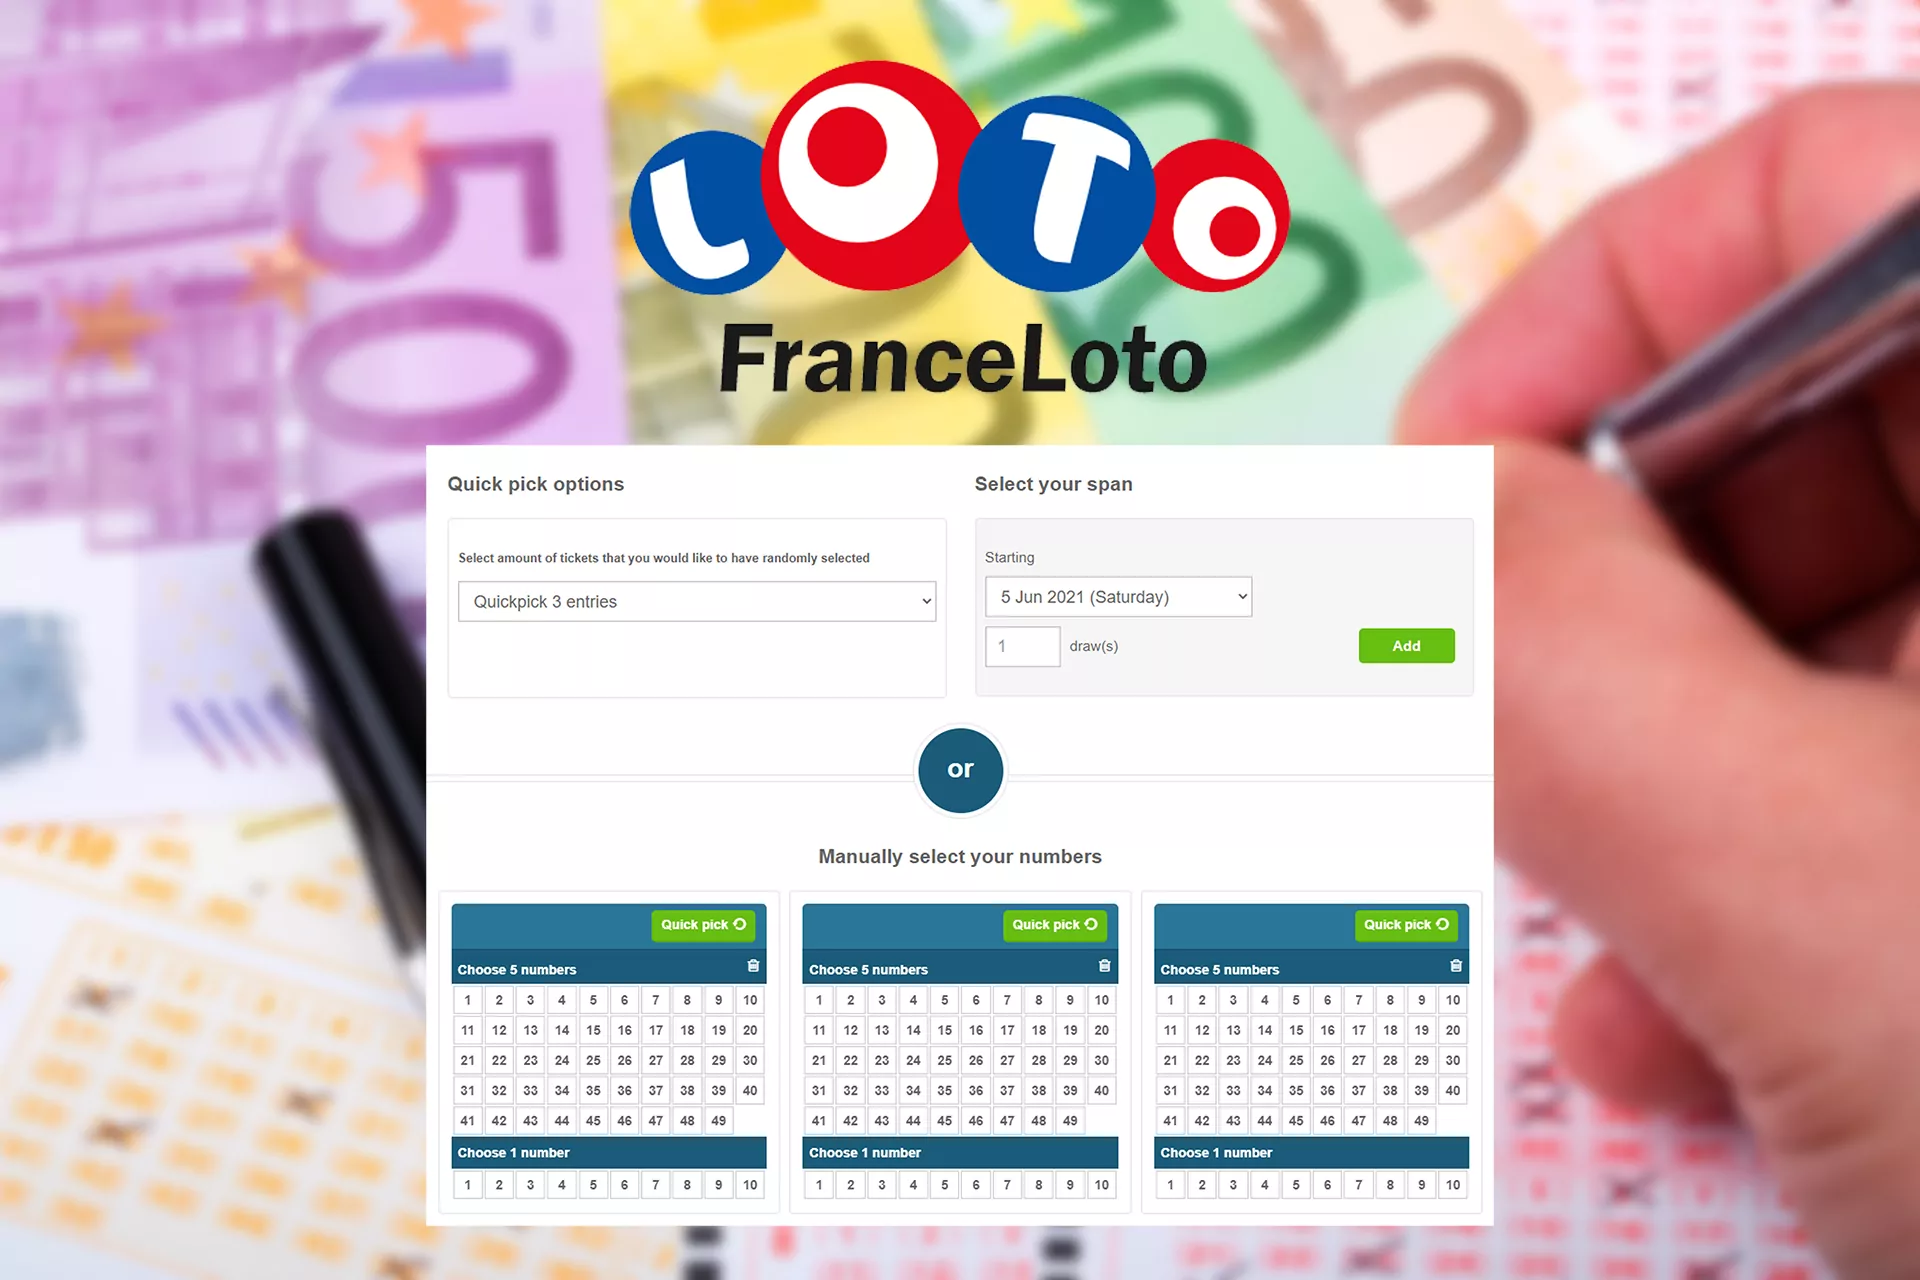 FranceLoto is a popular French lottery that provides jackpots in euros.